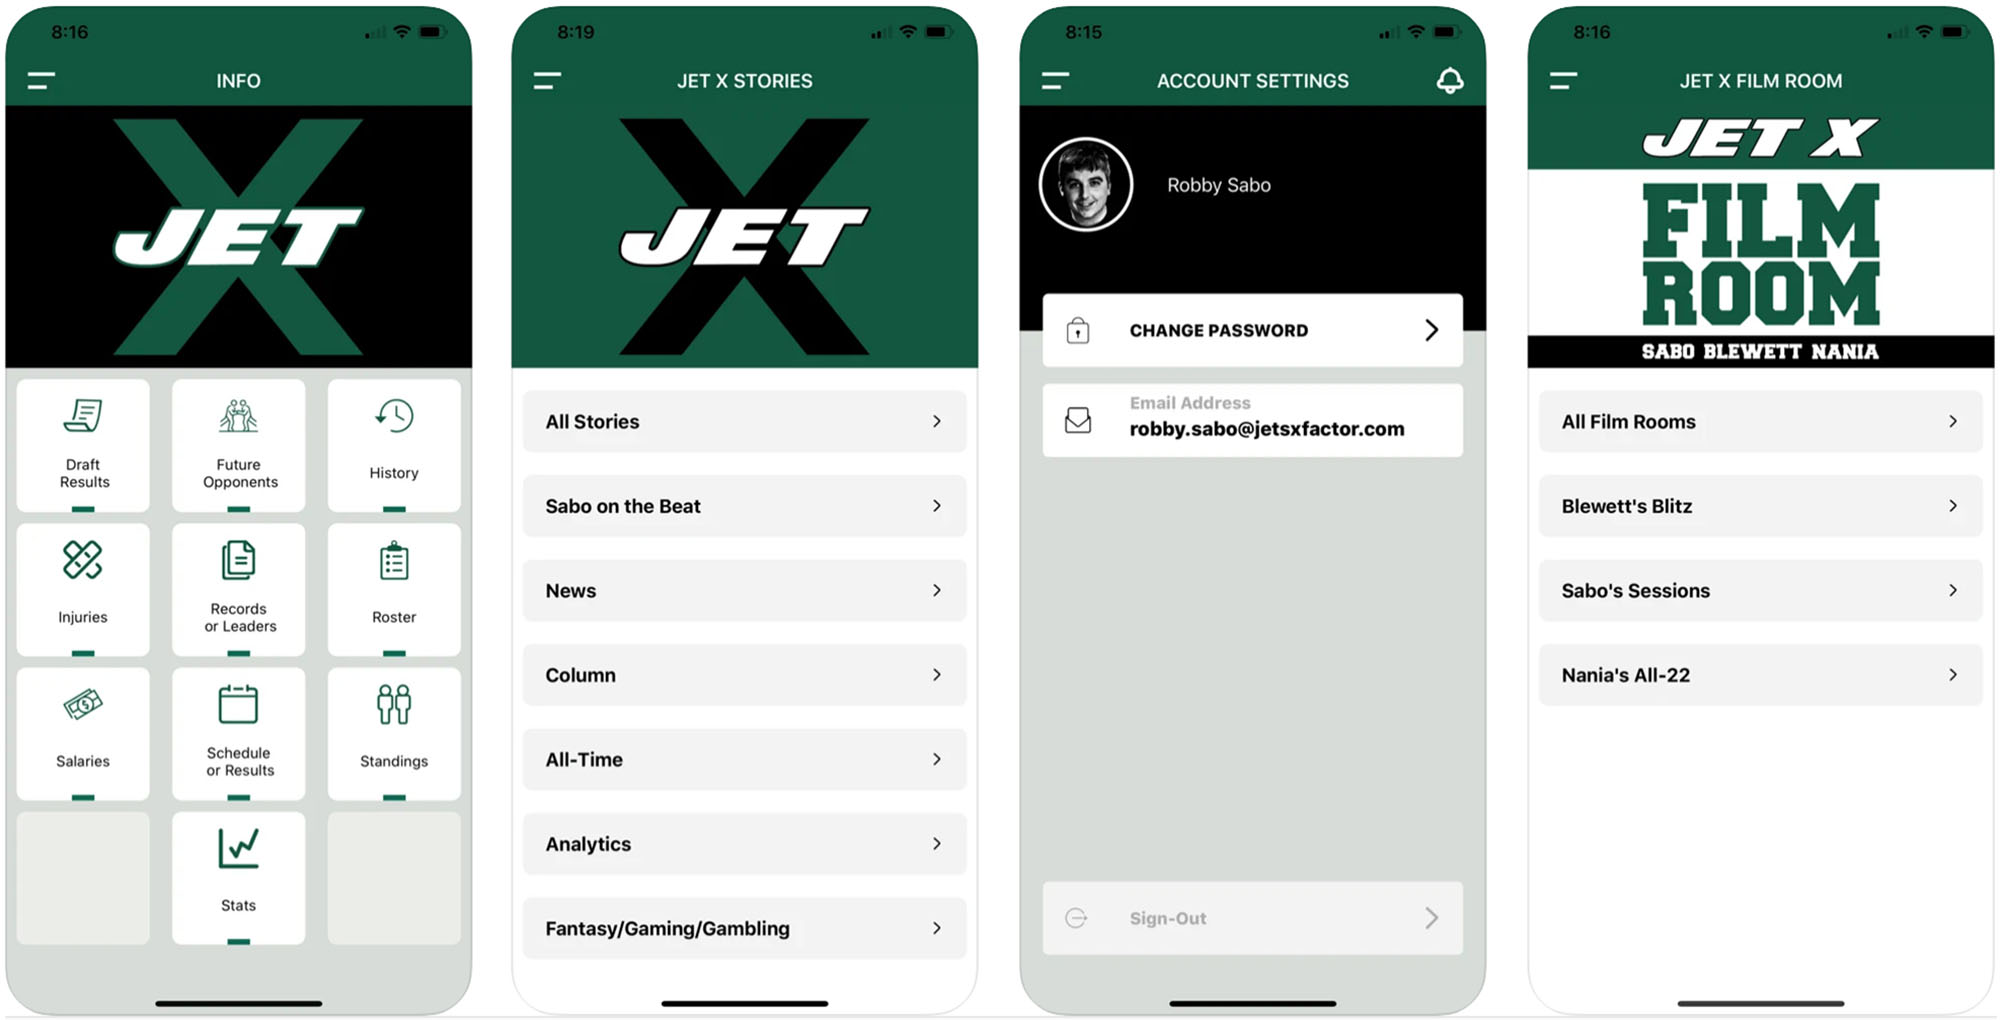 Jets X Mobile, App Store